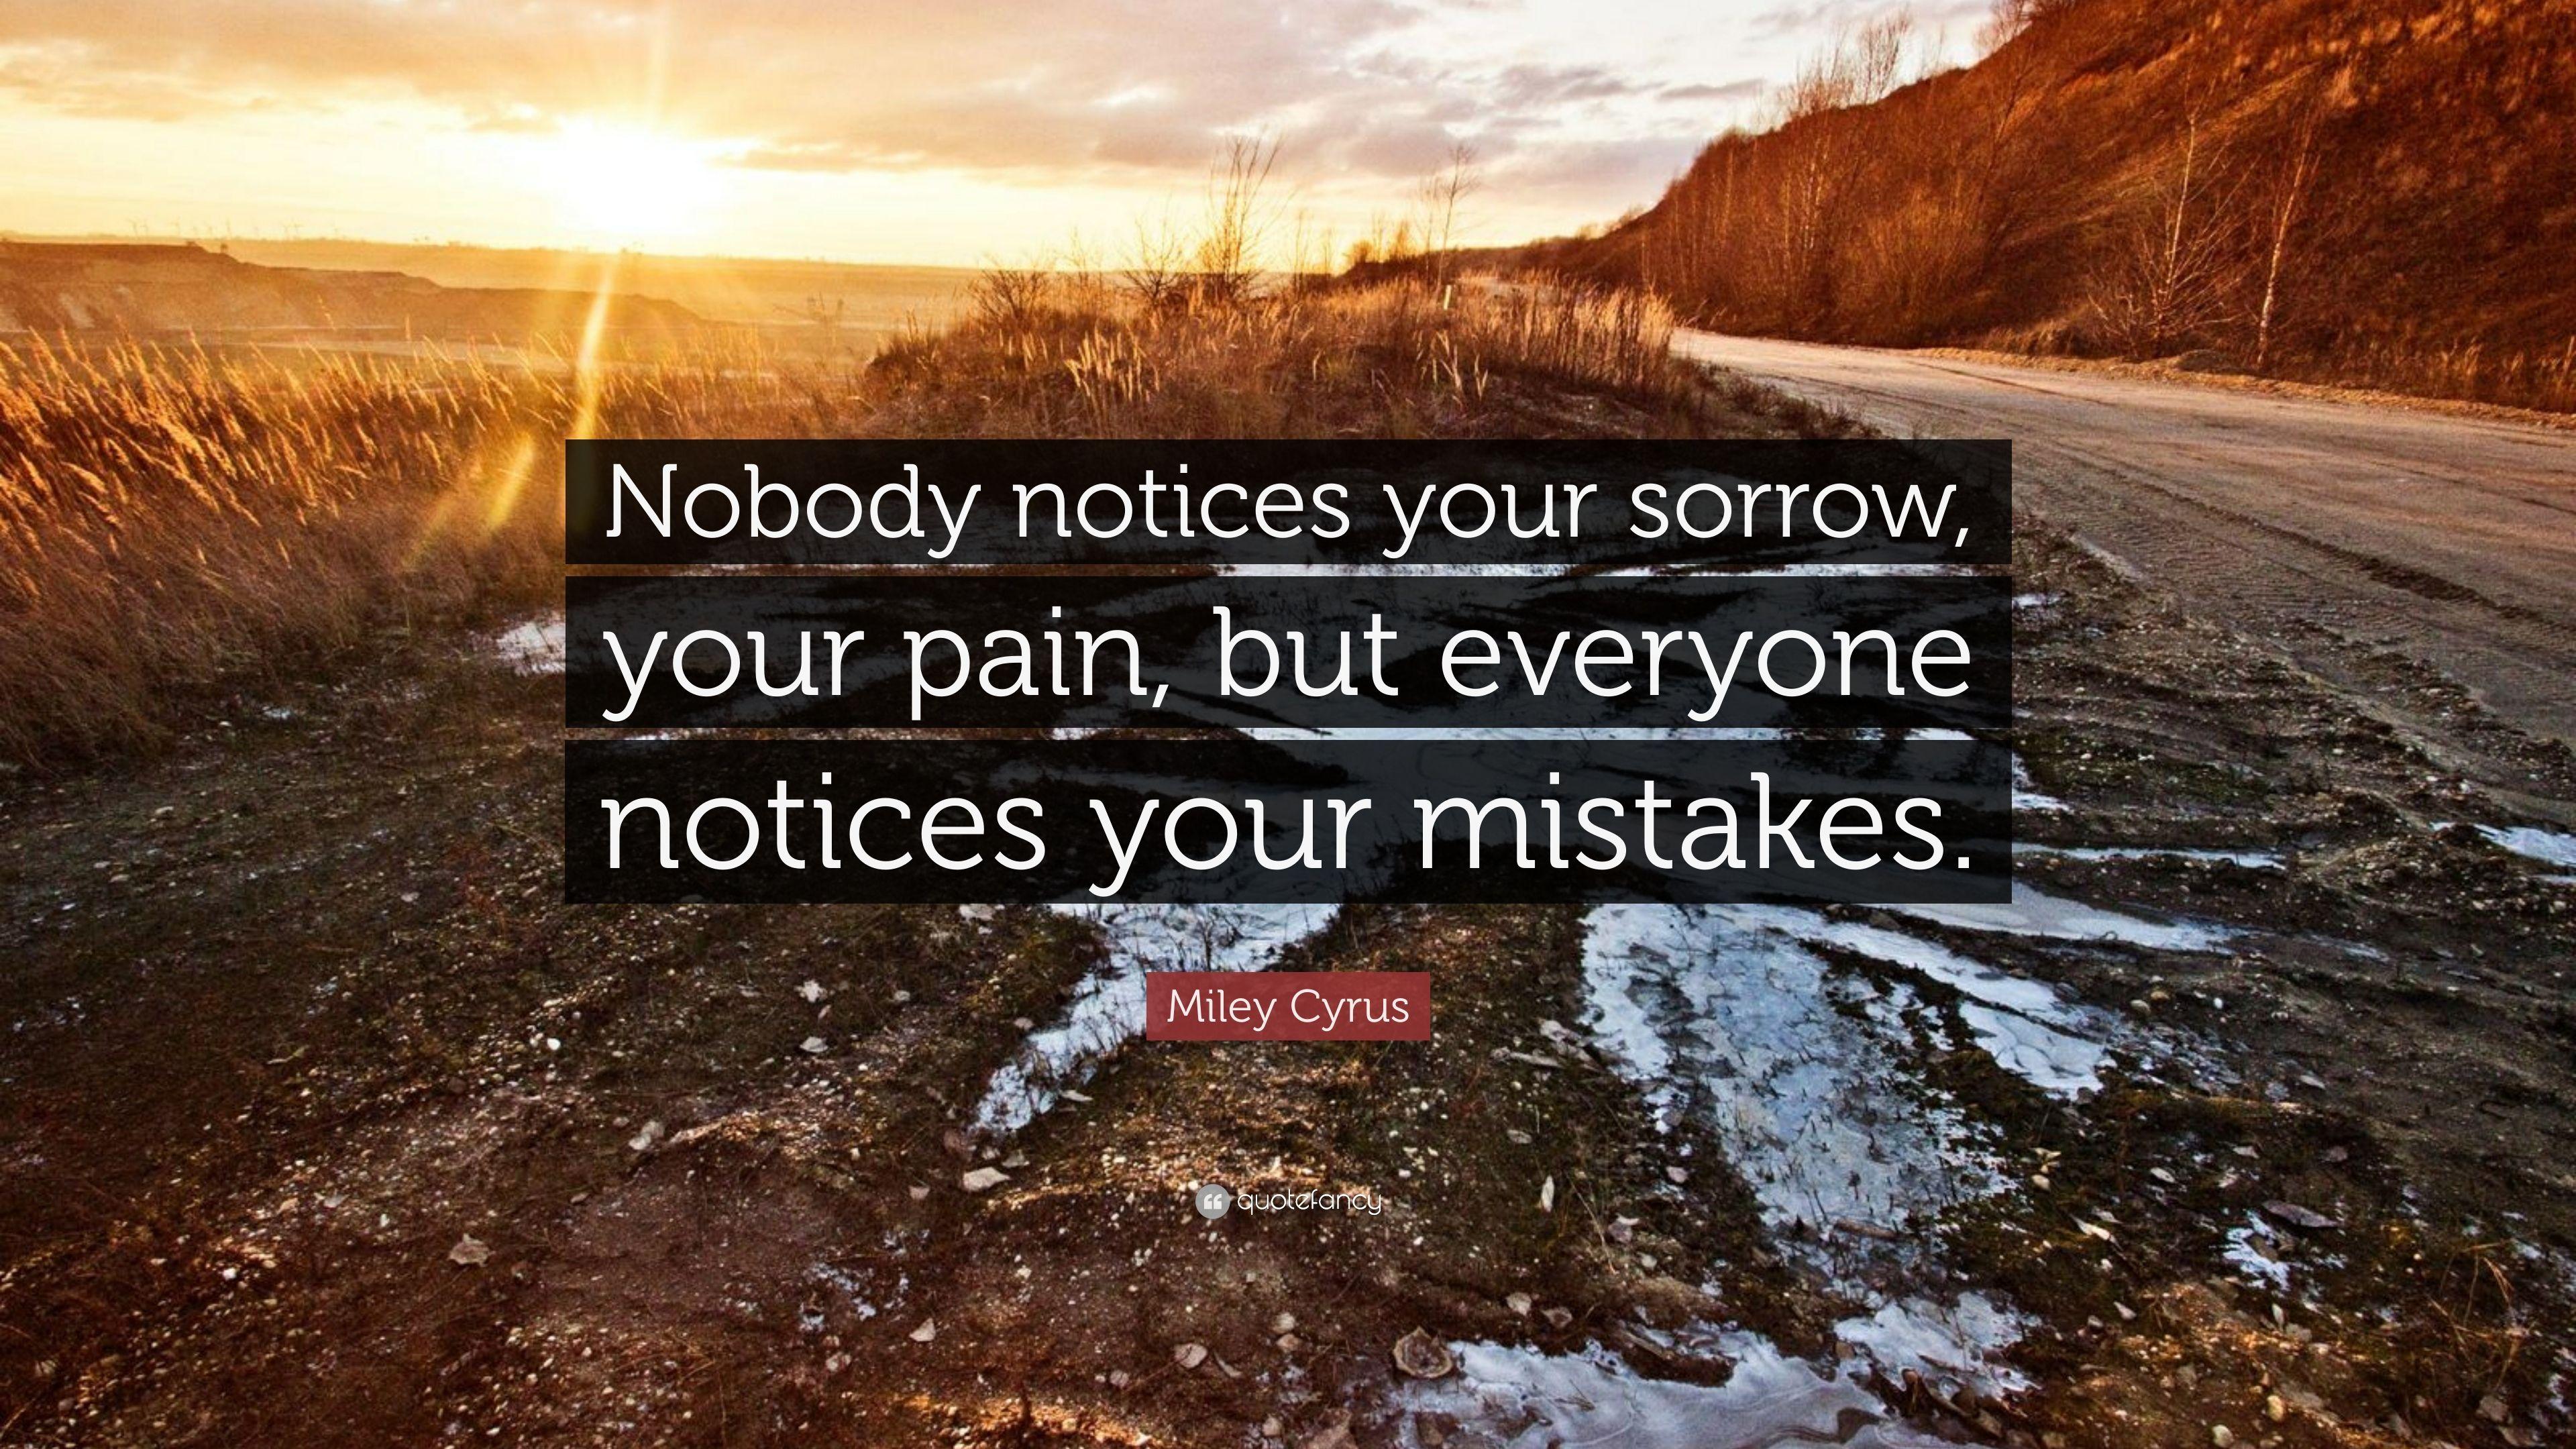 Miley Cyrus Quote: “Nobody notices your sorrow, your pain, but